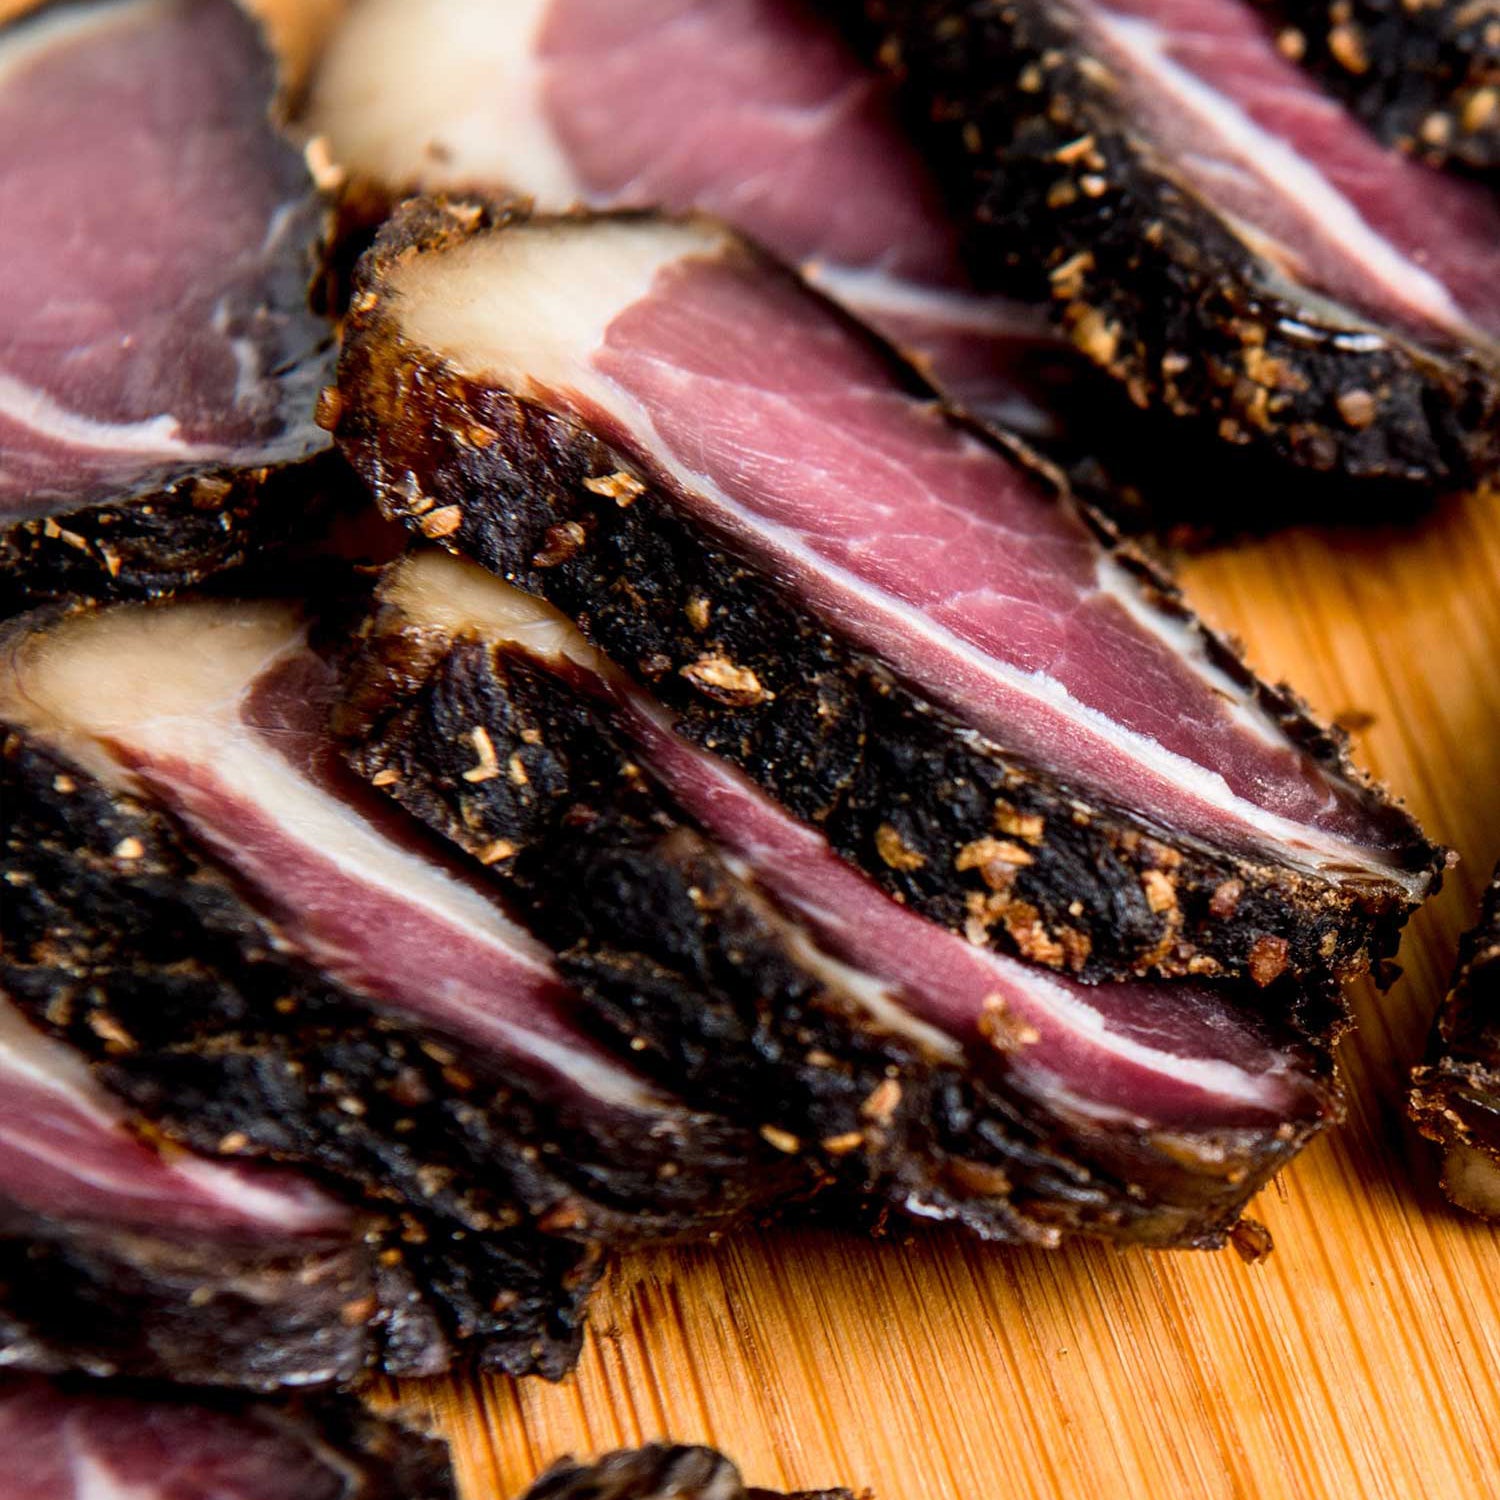 History of South African biltong – Bull and Cleaver